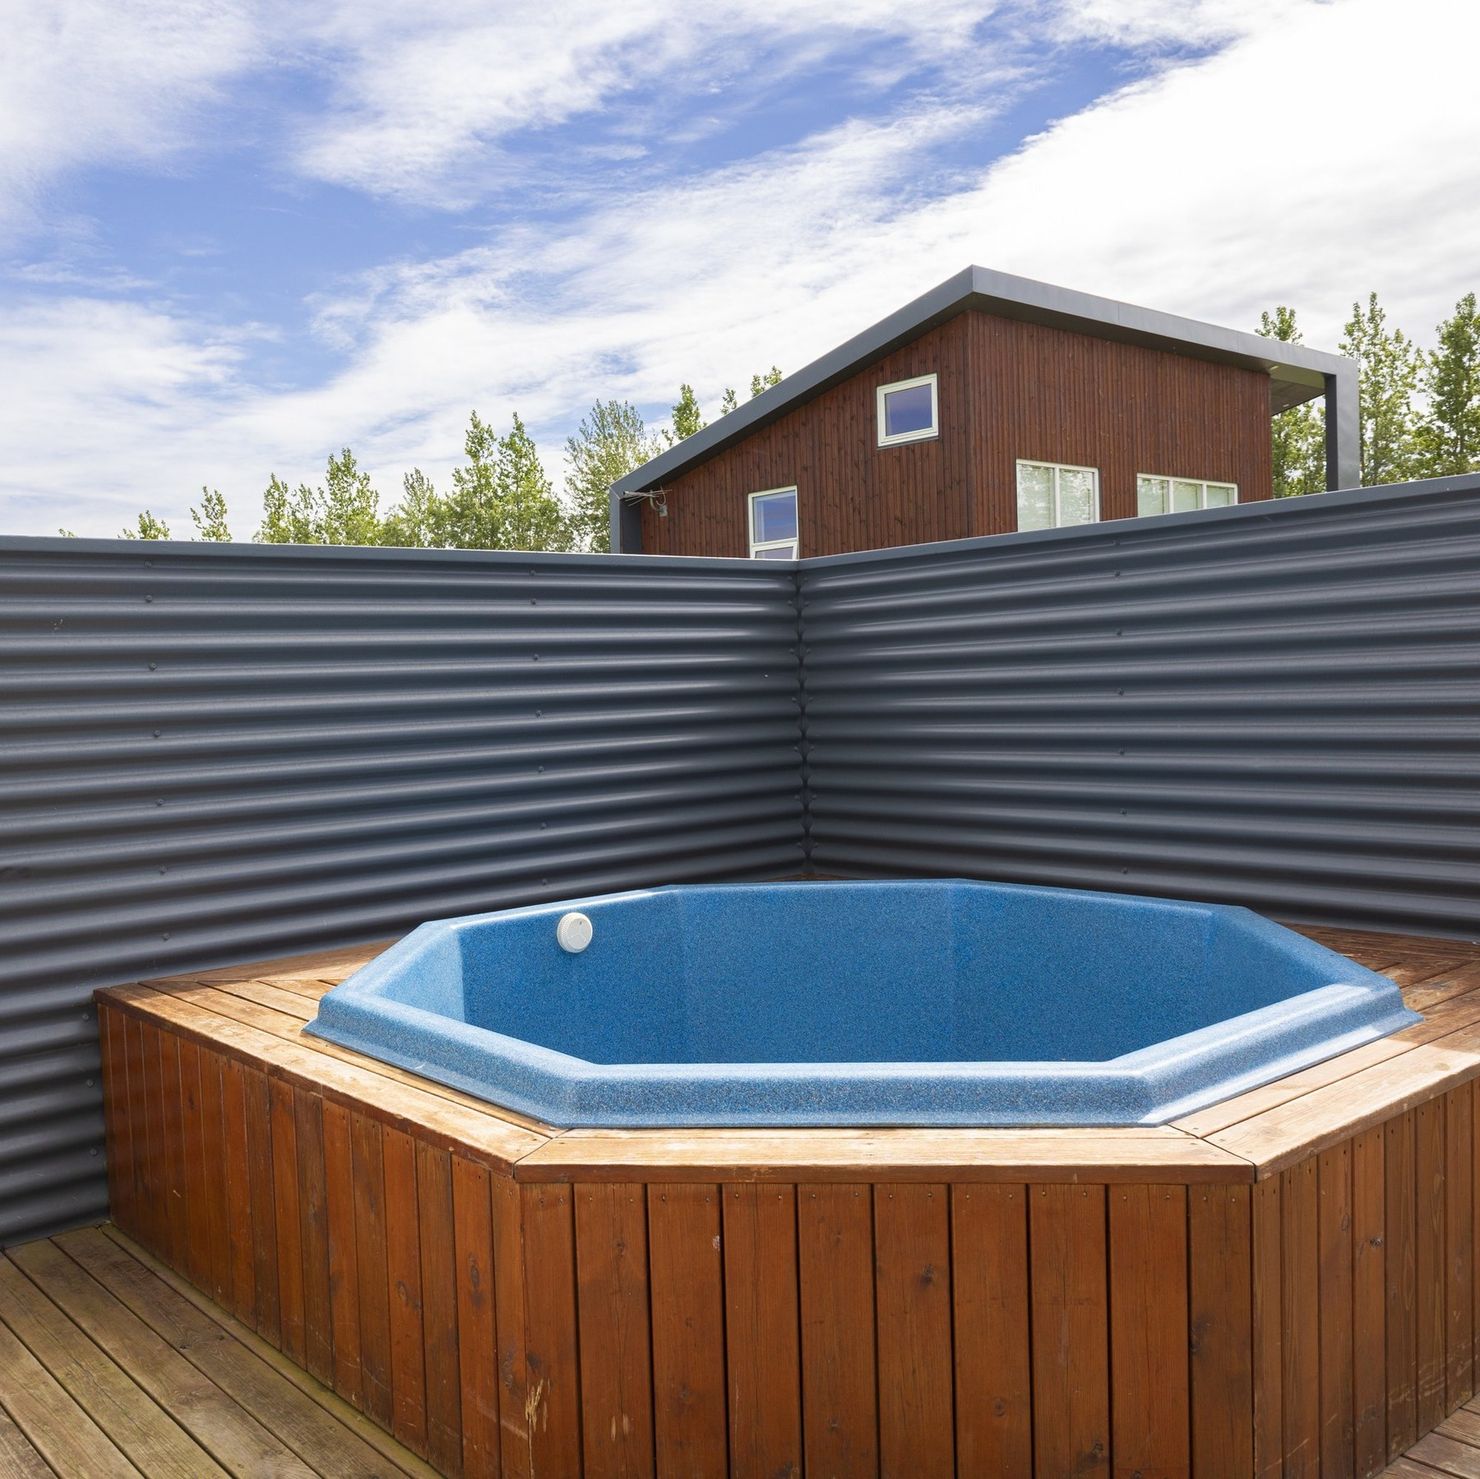 The private hot tub is a wonderful place to relax, no matter what the weather is like